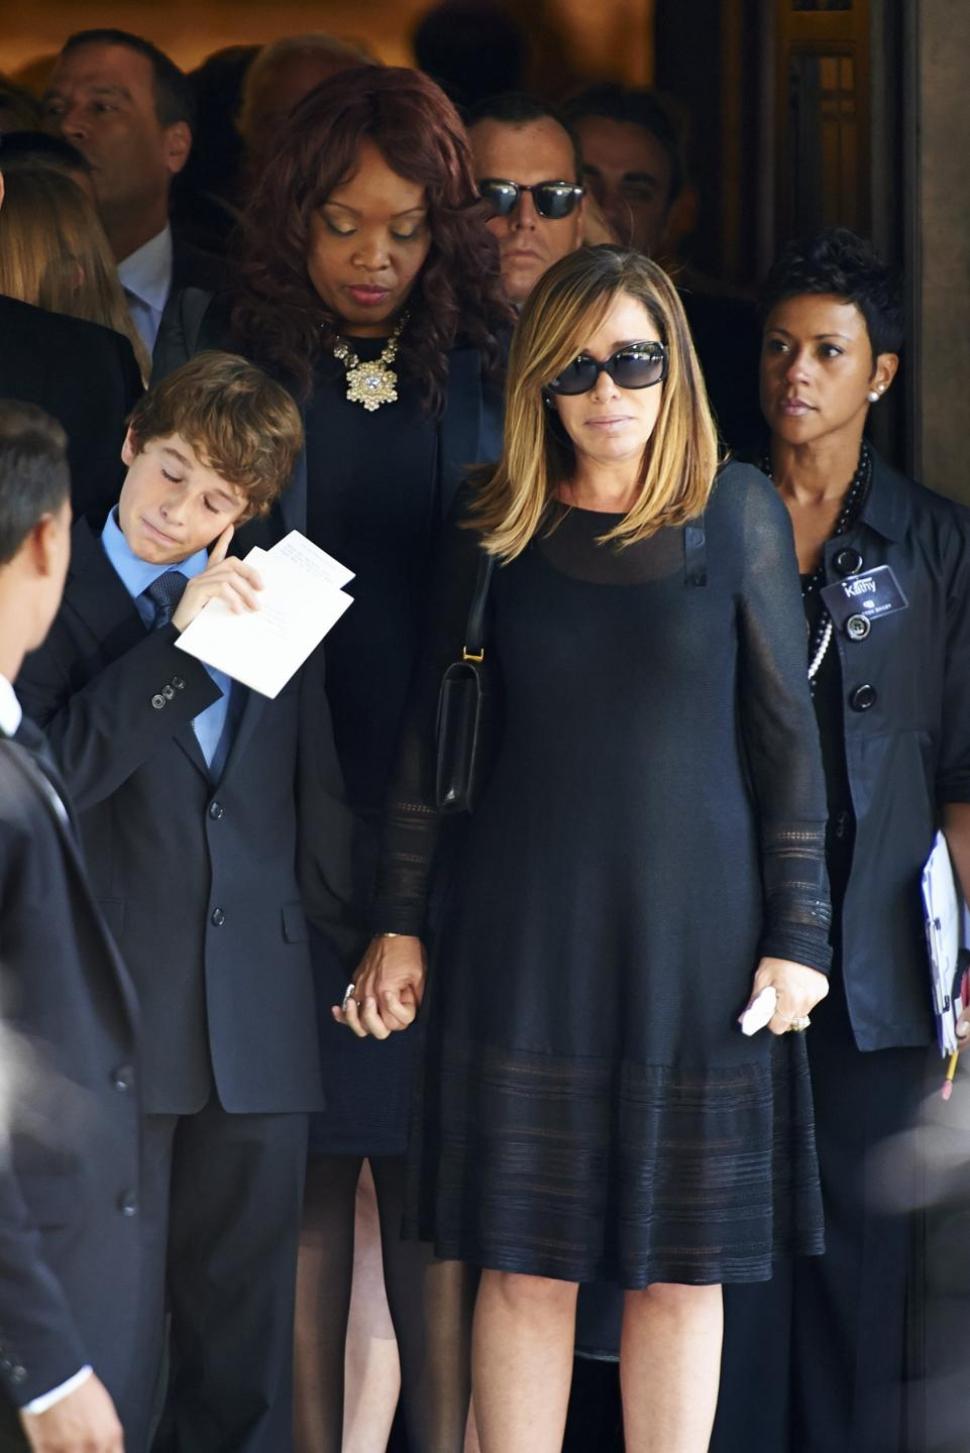 Melissa Rivers (r.) read the excerpt from her book as a eulogy at Joan Rivers’ funeral Sept. 7.